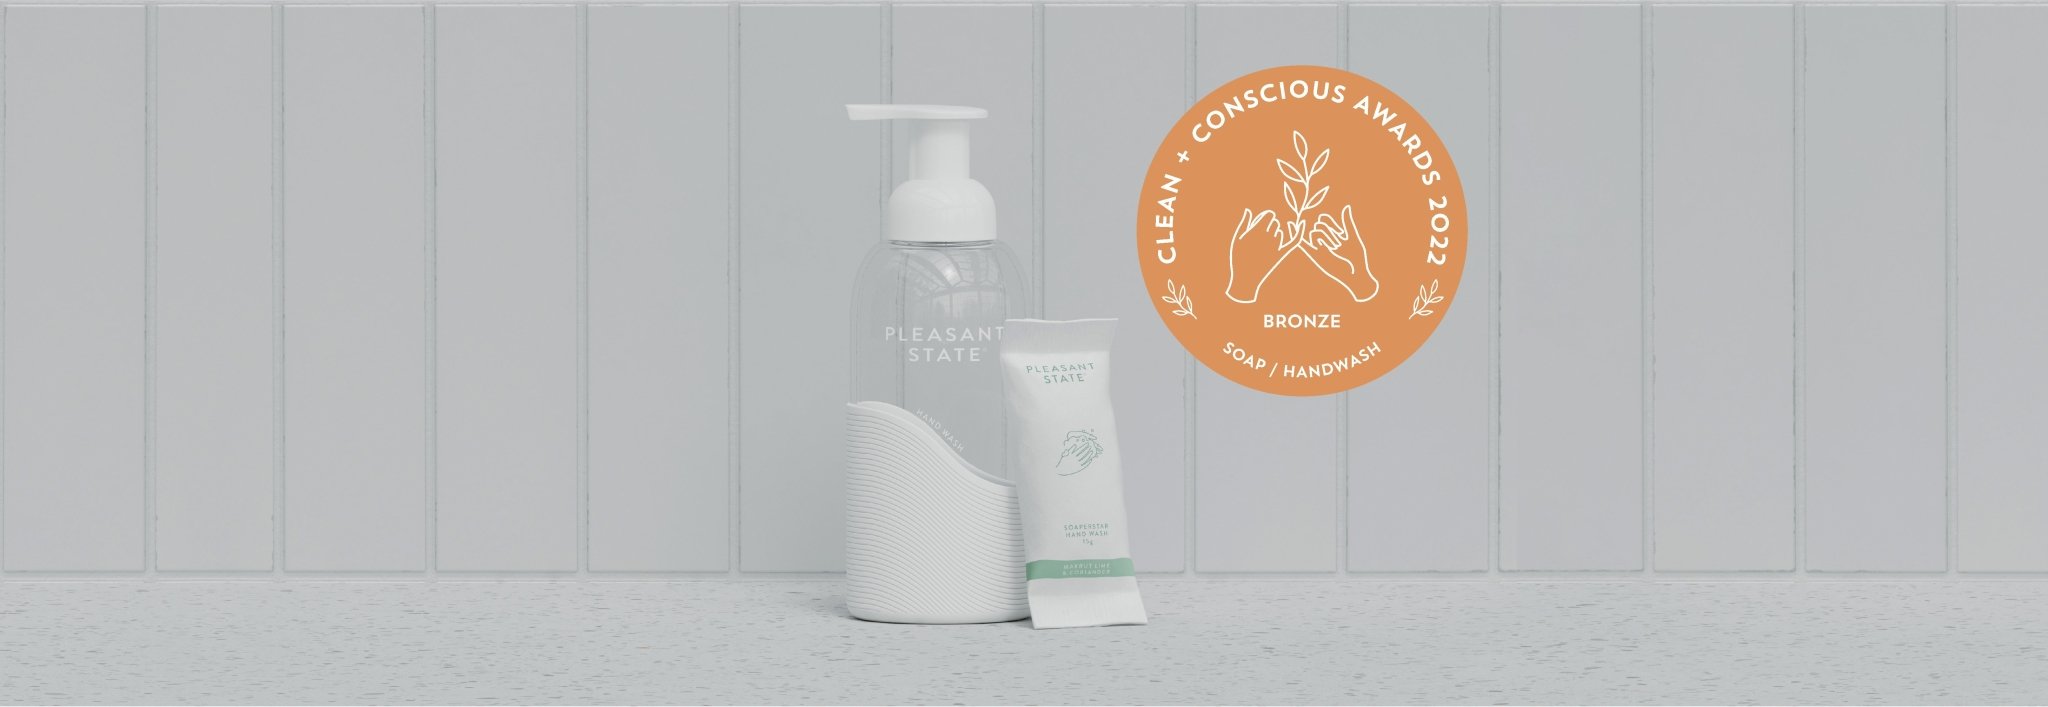 Pleasant State Wins Bronze at the Clean + Conscious Awards 2022! - Pleasant State